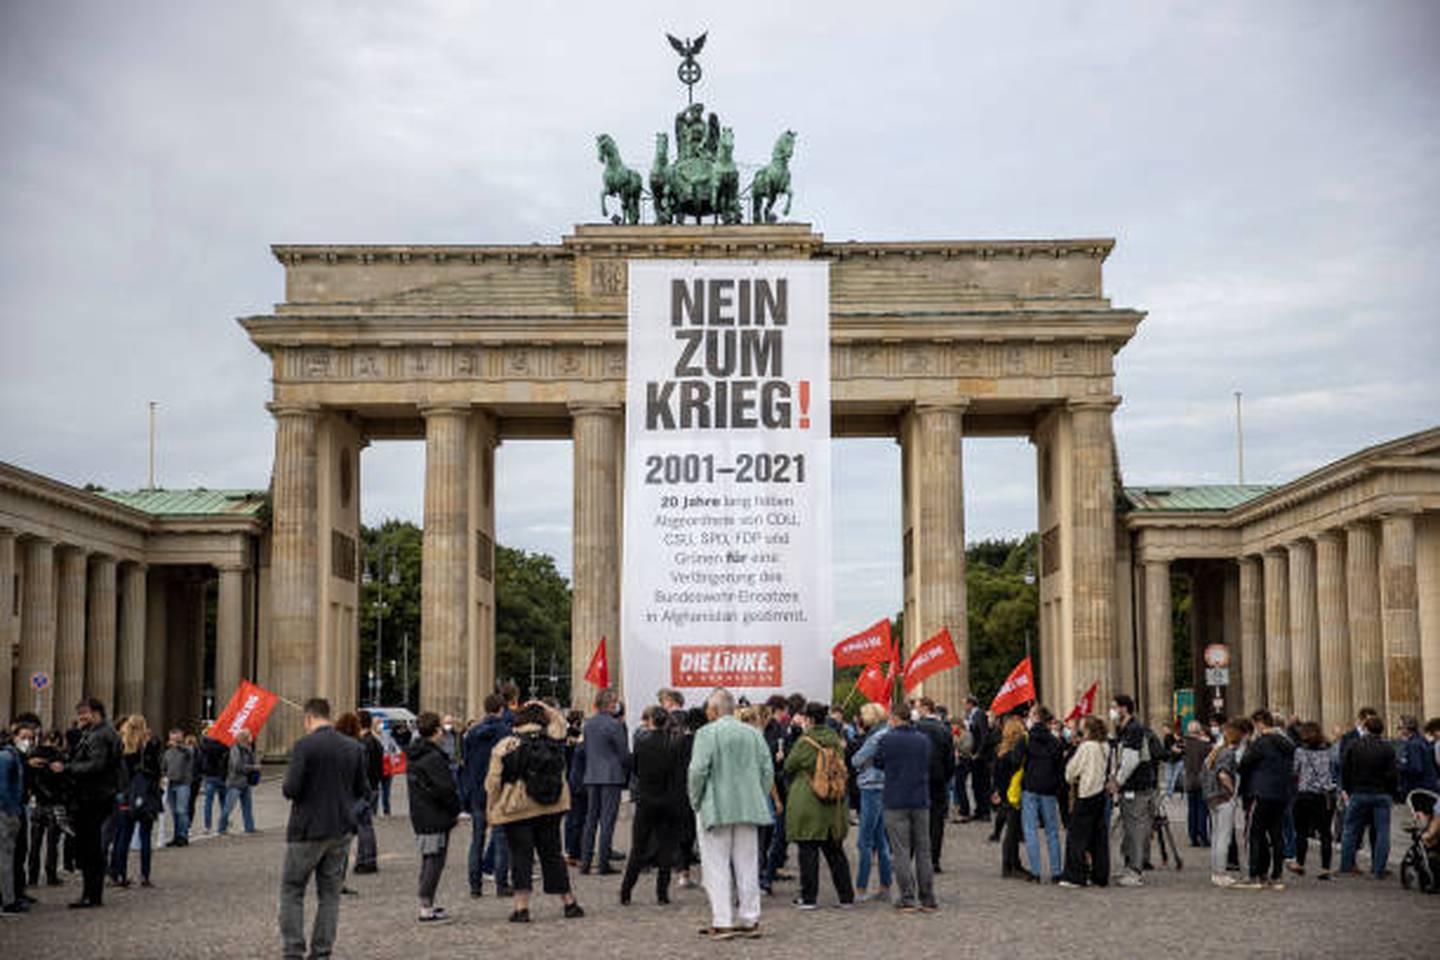 Supporters of the Linke party, which hopes to reduce refugee flows by stopping arms exports, hold a protest at the Brandenburg Gate in Berlin. Getty 